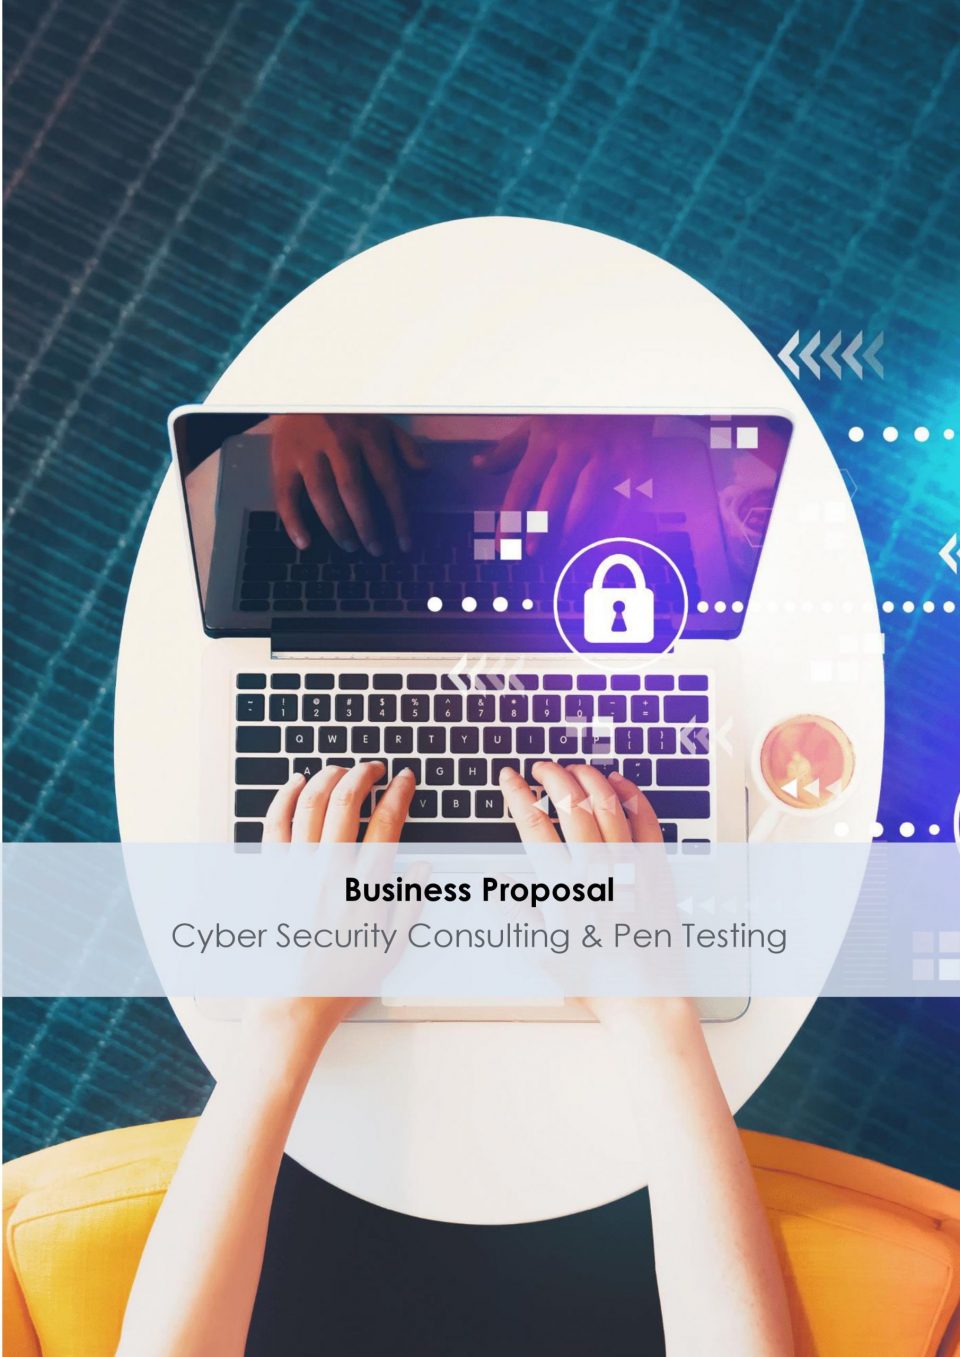 Business Proposal Template Cyber Security Consulting pentesting Proposal 01 1 scaled